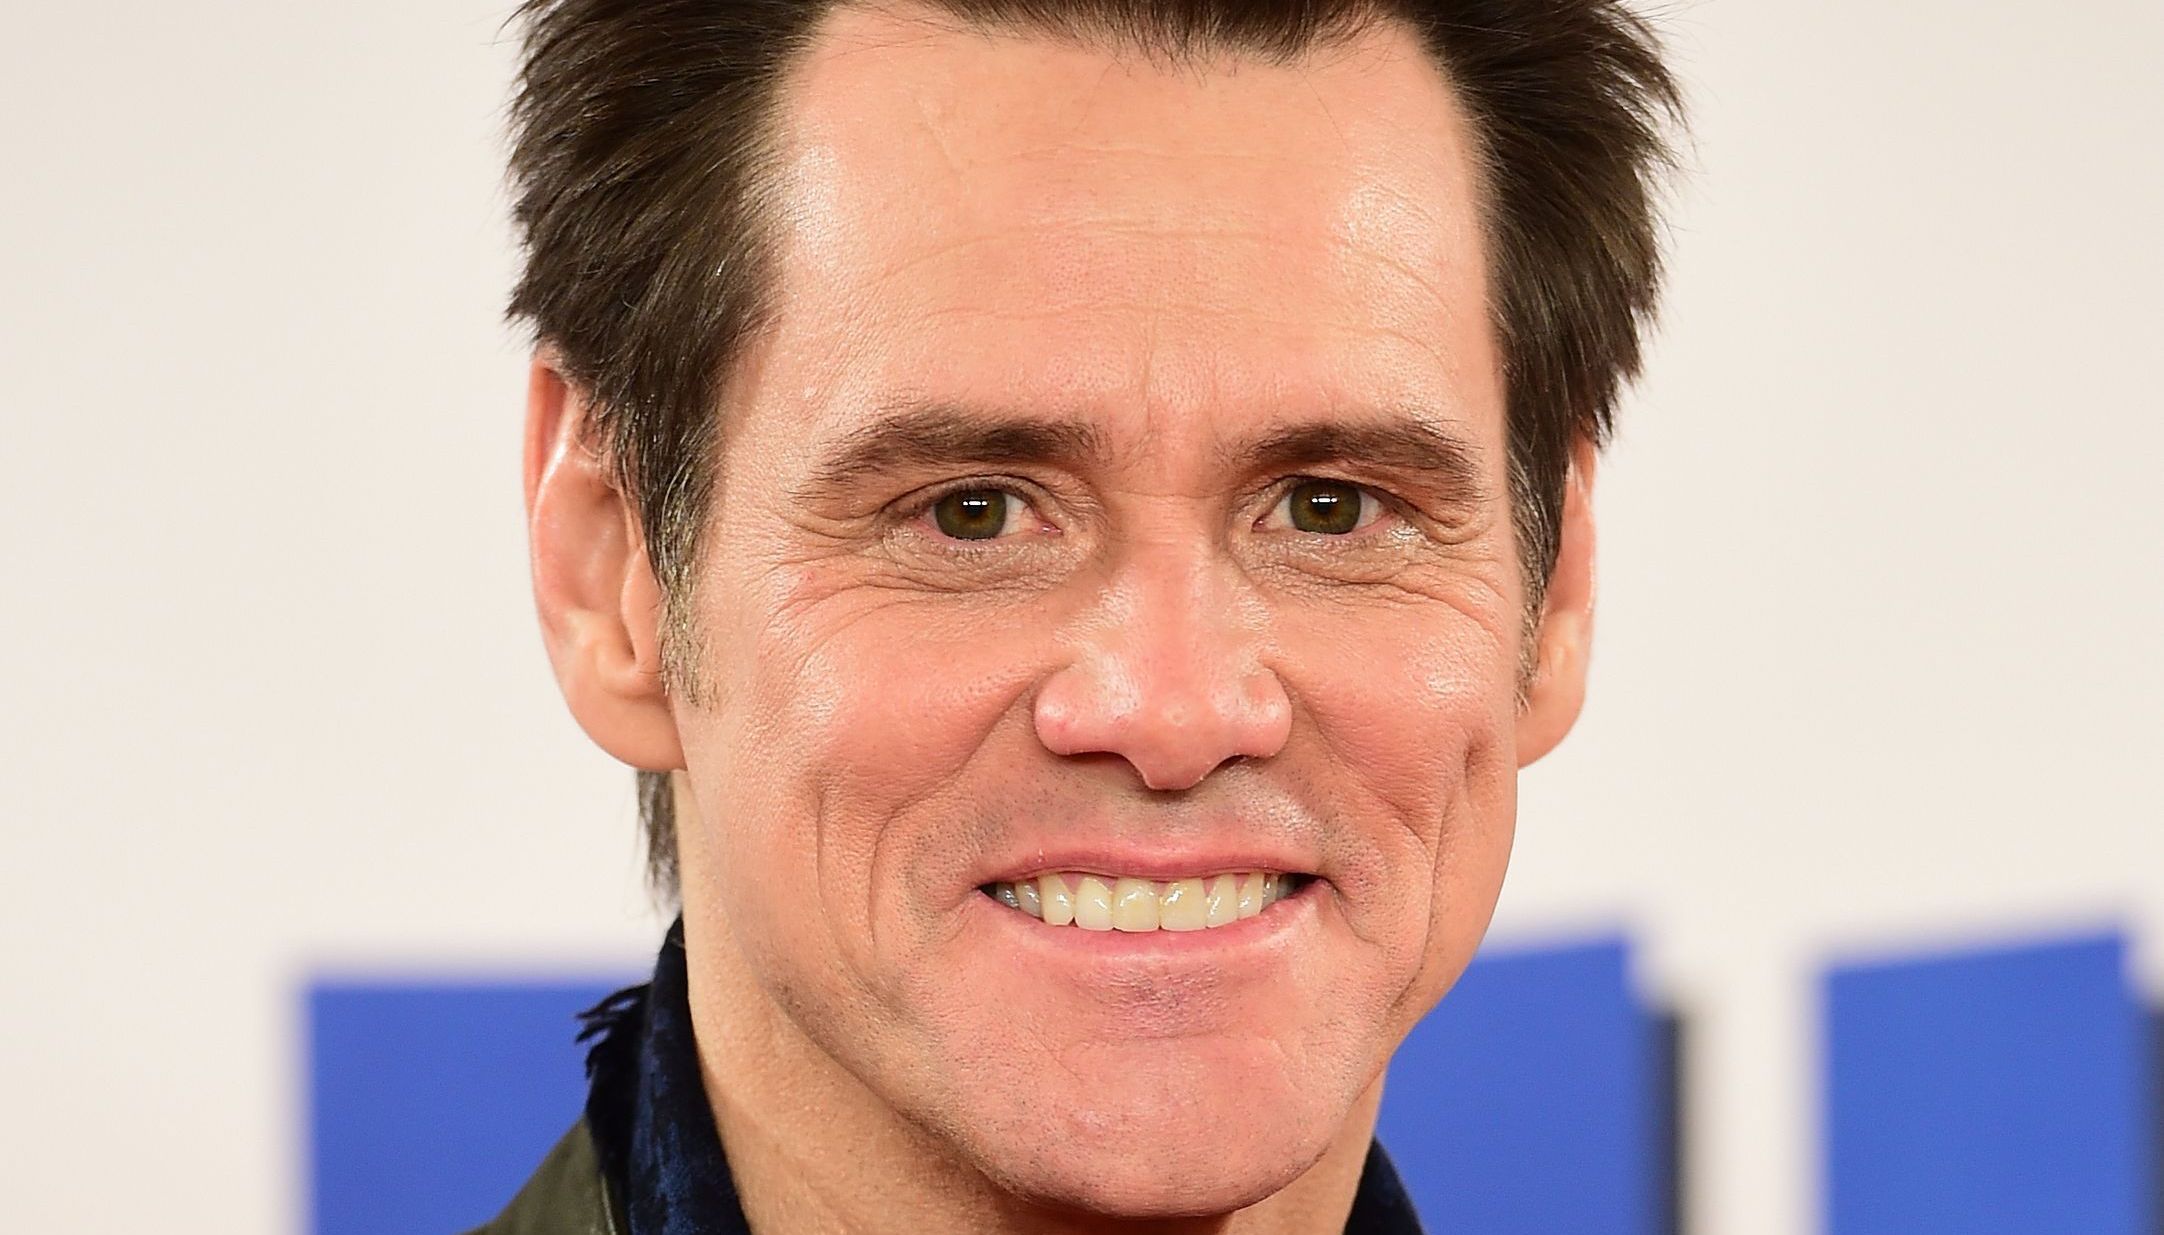 Jim Carrey said Will Smith's slap %22cast a pall over everybody\u2019s shining moment%22 at the awards ceremony